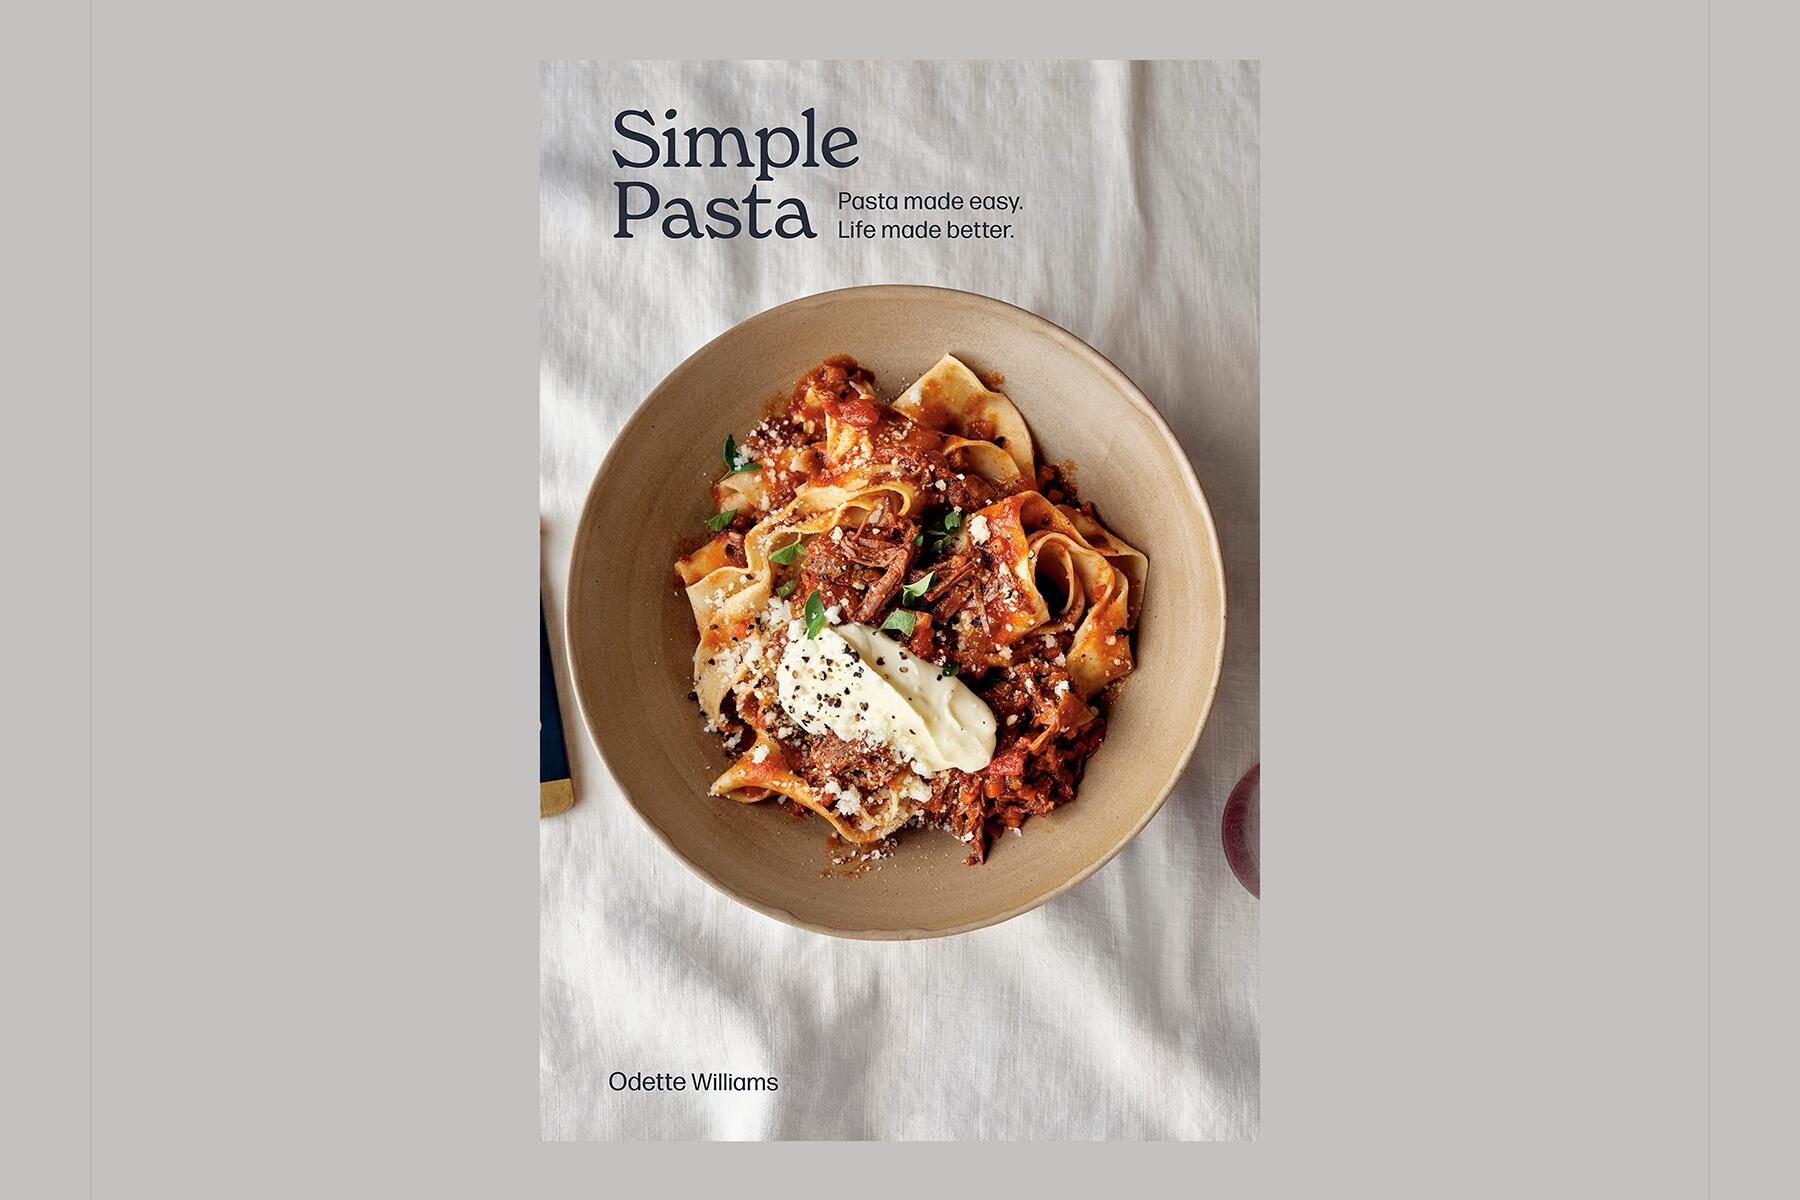 <a href='https://www.fodors.com/world/europe/italy/experiences/news/photos/the-best-italian-cookbooks#'>From &quot;Can't Get to Italy this Summer? Whisk Yourself Away With 10 Italian Cookbooks: 'Simple Pasta'&quot;</a>